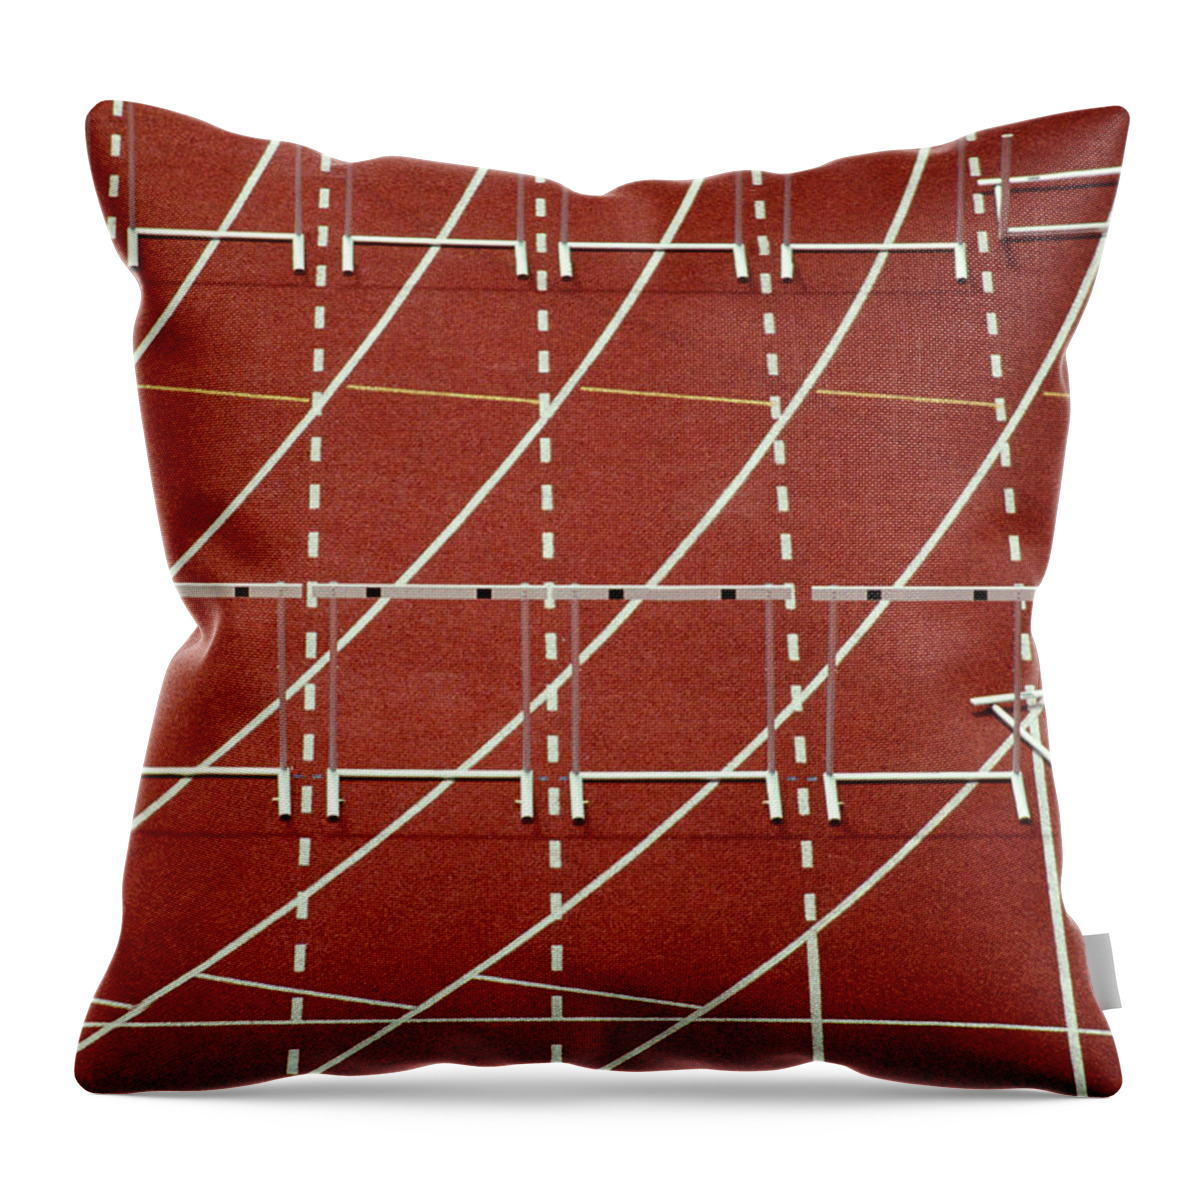 Problems Throw Pillow featuring the photograph Running Track With Knocked Down Hurdles by Grant Faint